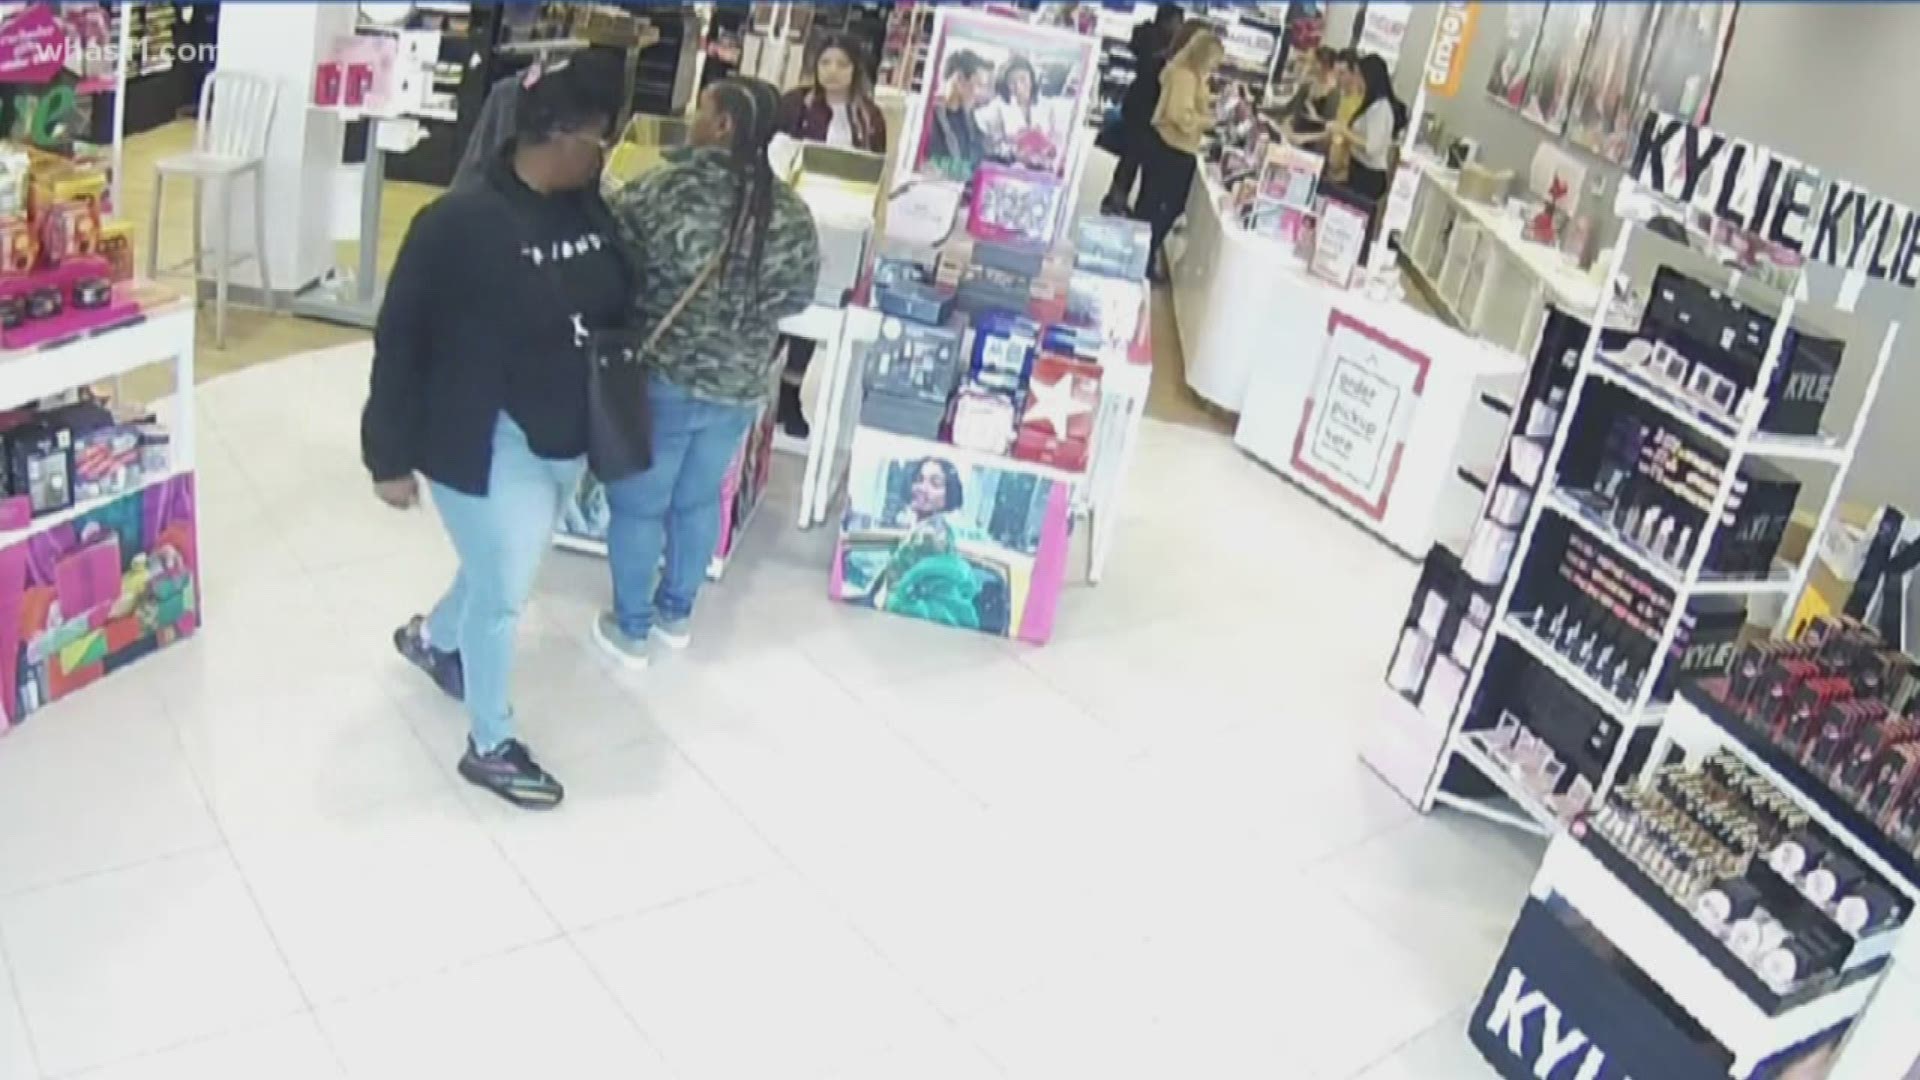 St. Matthews police said they've arrested one person in connection to the theft thanks to a tip.